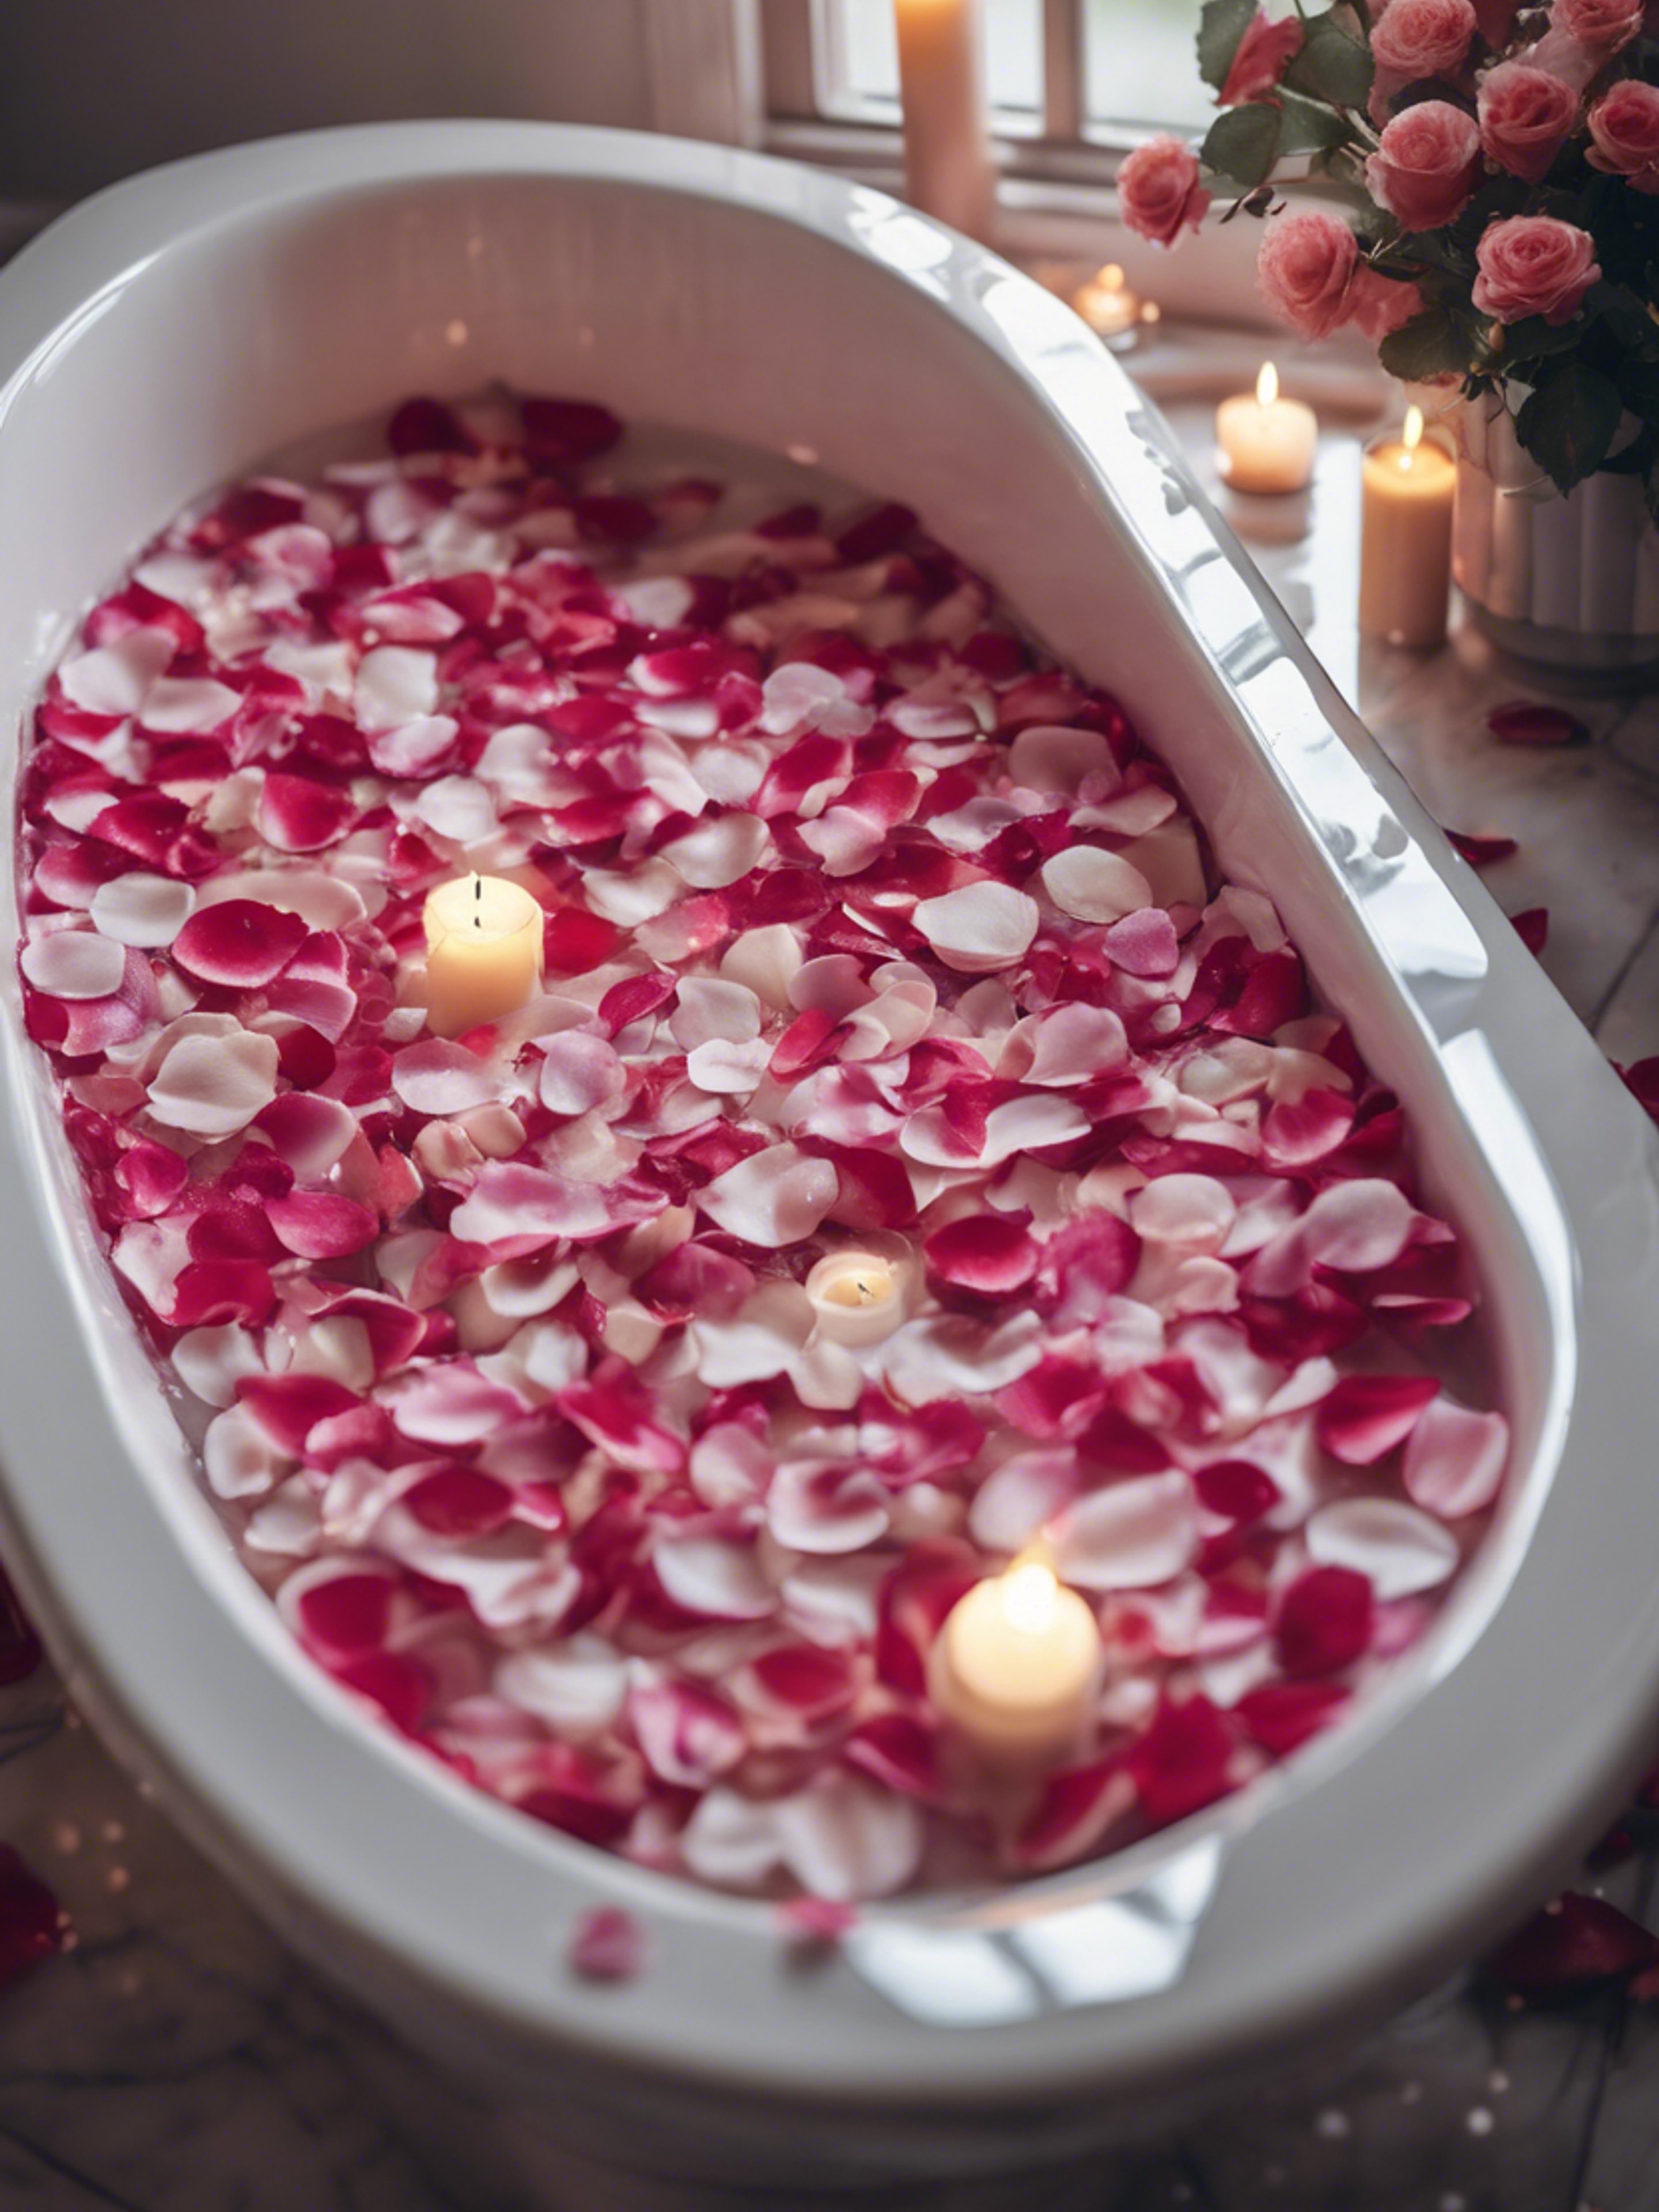 An inviting bubble bath in a white tub with rose petals and candles around the edge of the tub. 墙纸[29454076f2ac4acb9df8]